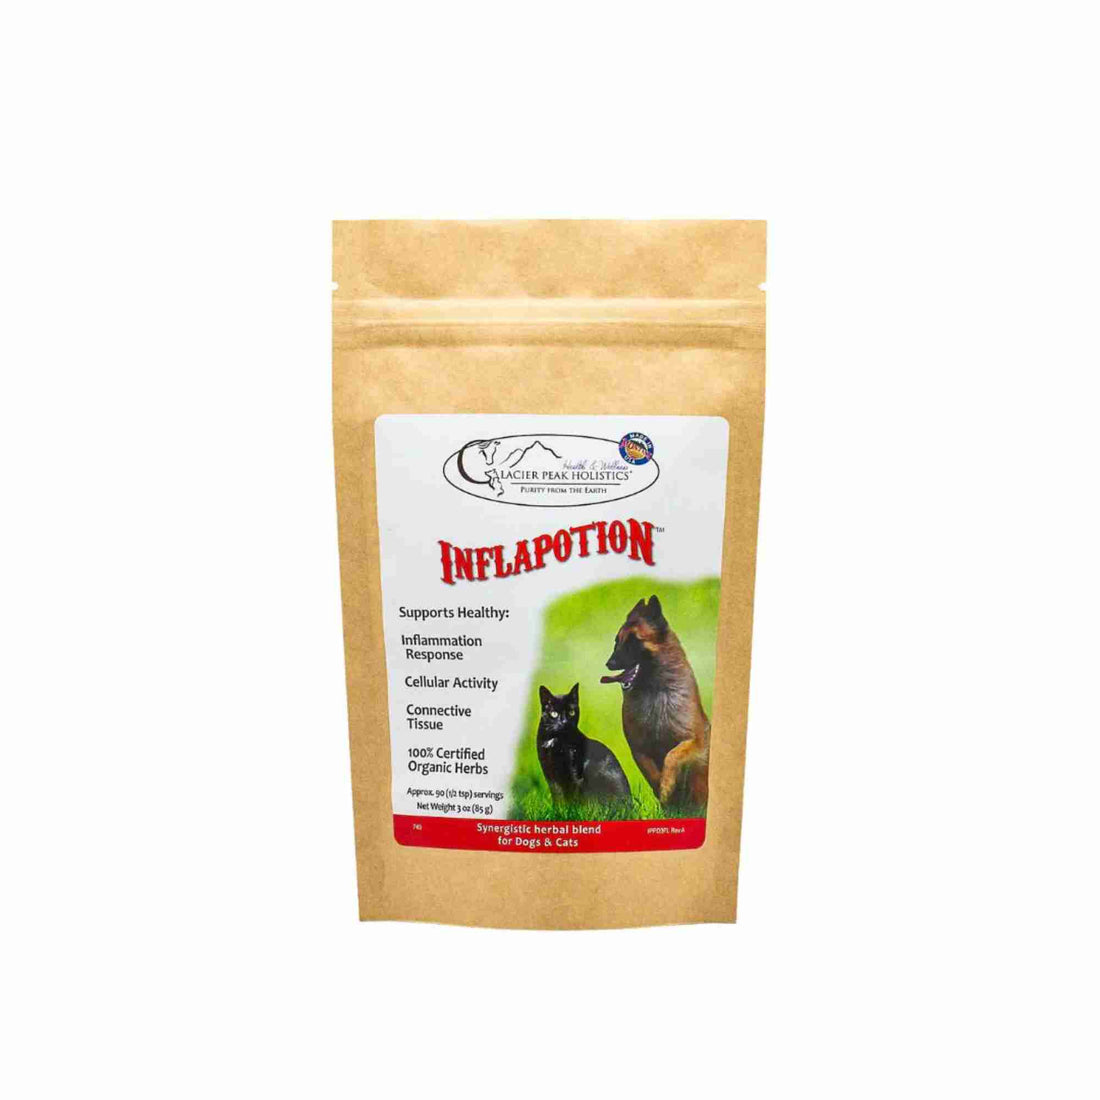 Glacier Peaks Holistics - Inflapotion - Herbal Blend for cats and dogs supporting inflammtion response, cellualar activity made of 100% certified organic herbs front of pouch